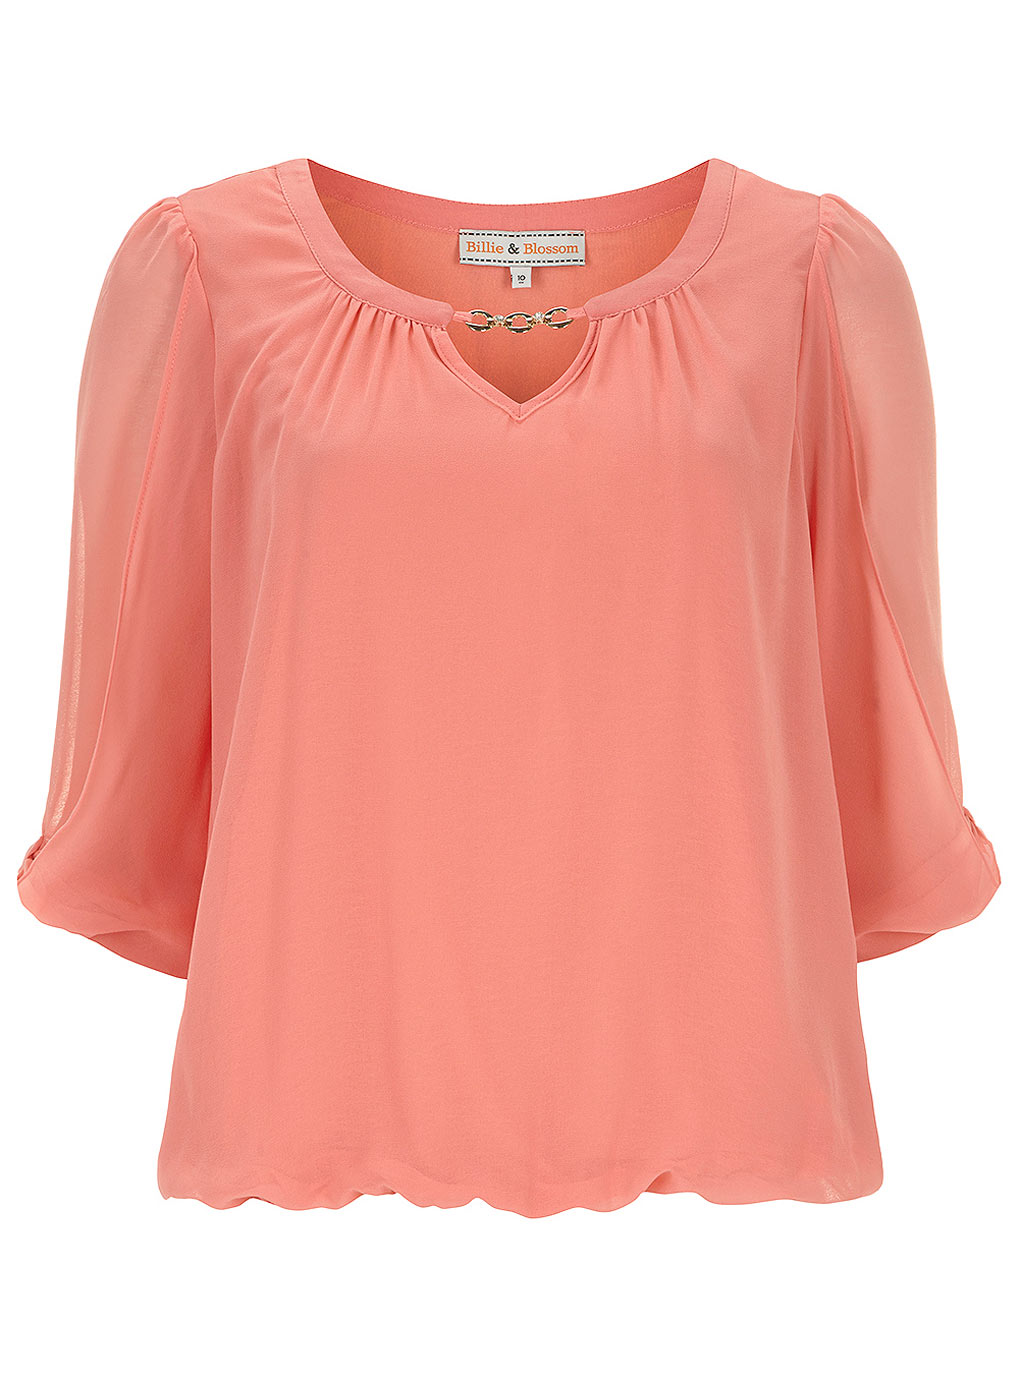 Dorothy Perkins Billie and Blossom Coral gold bar blouse 12273860